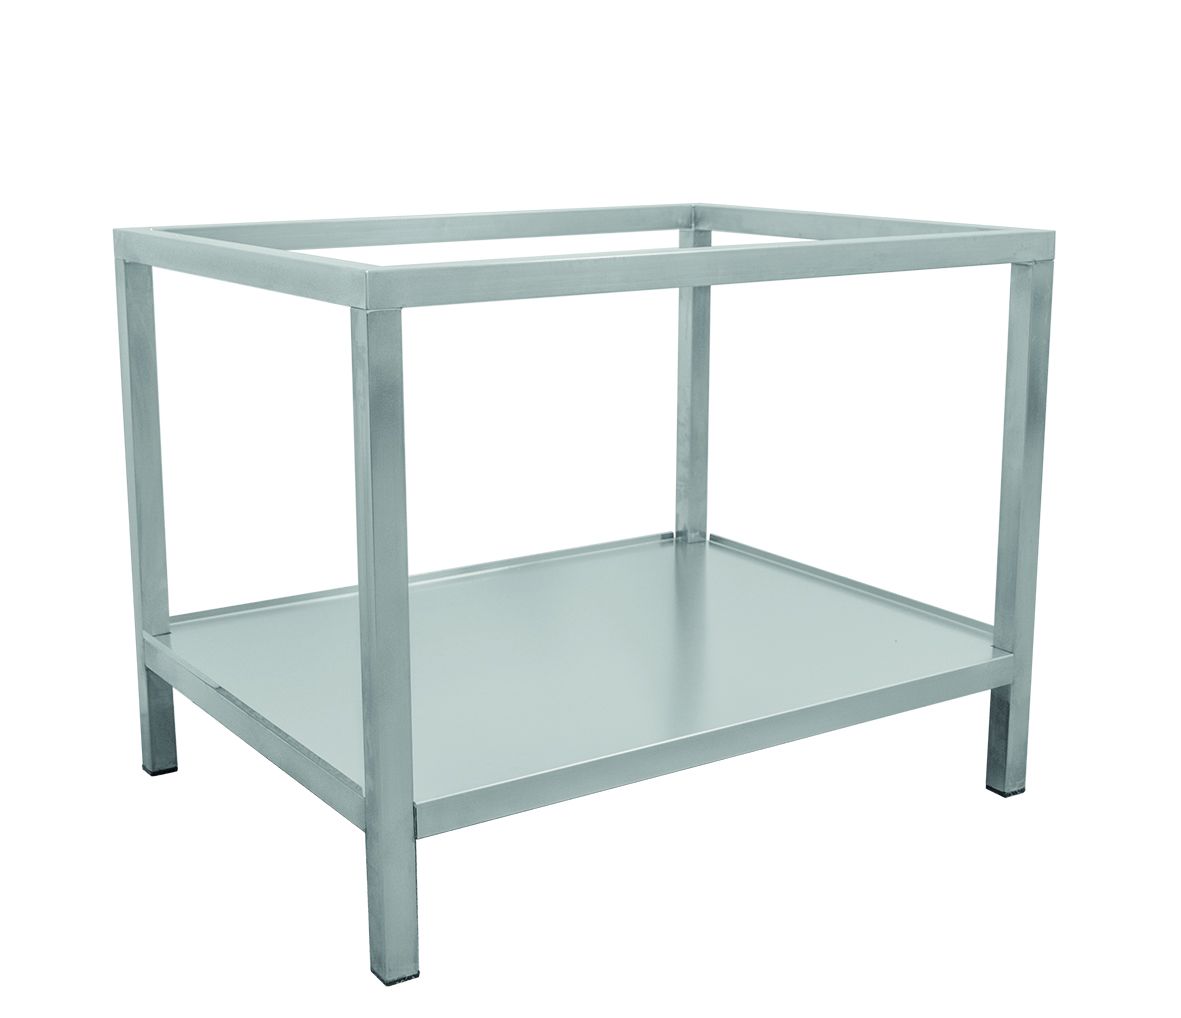 Parry PST3 - Stainless Steel Equipment Stand